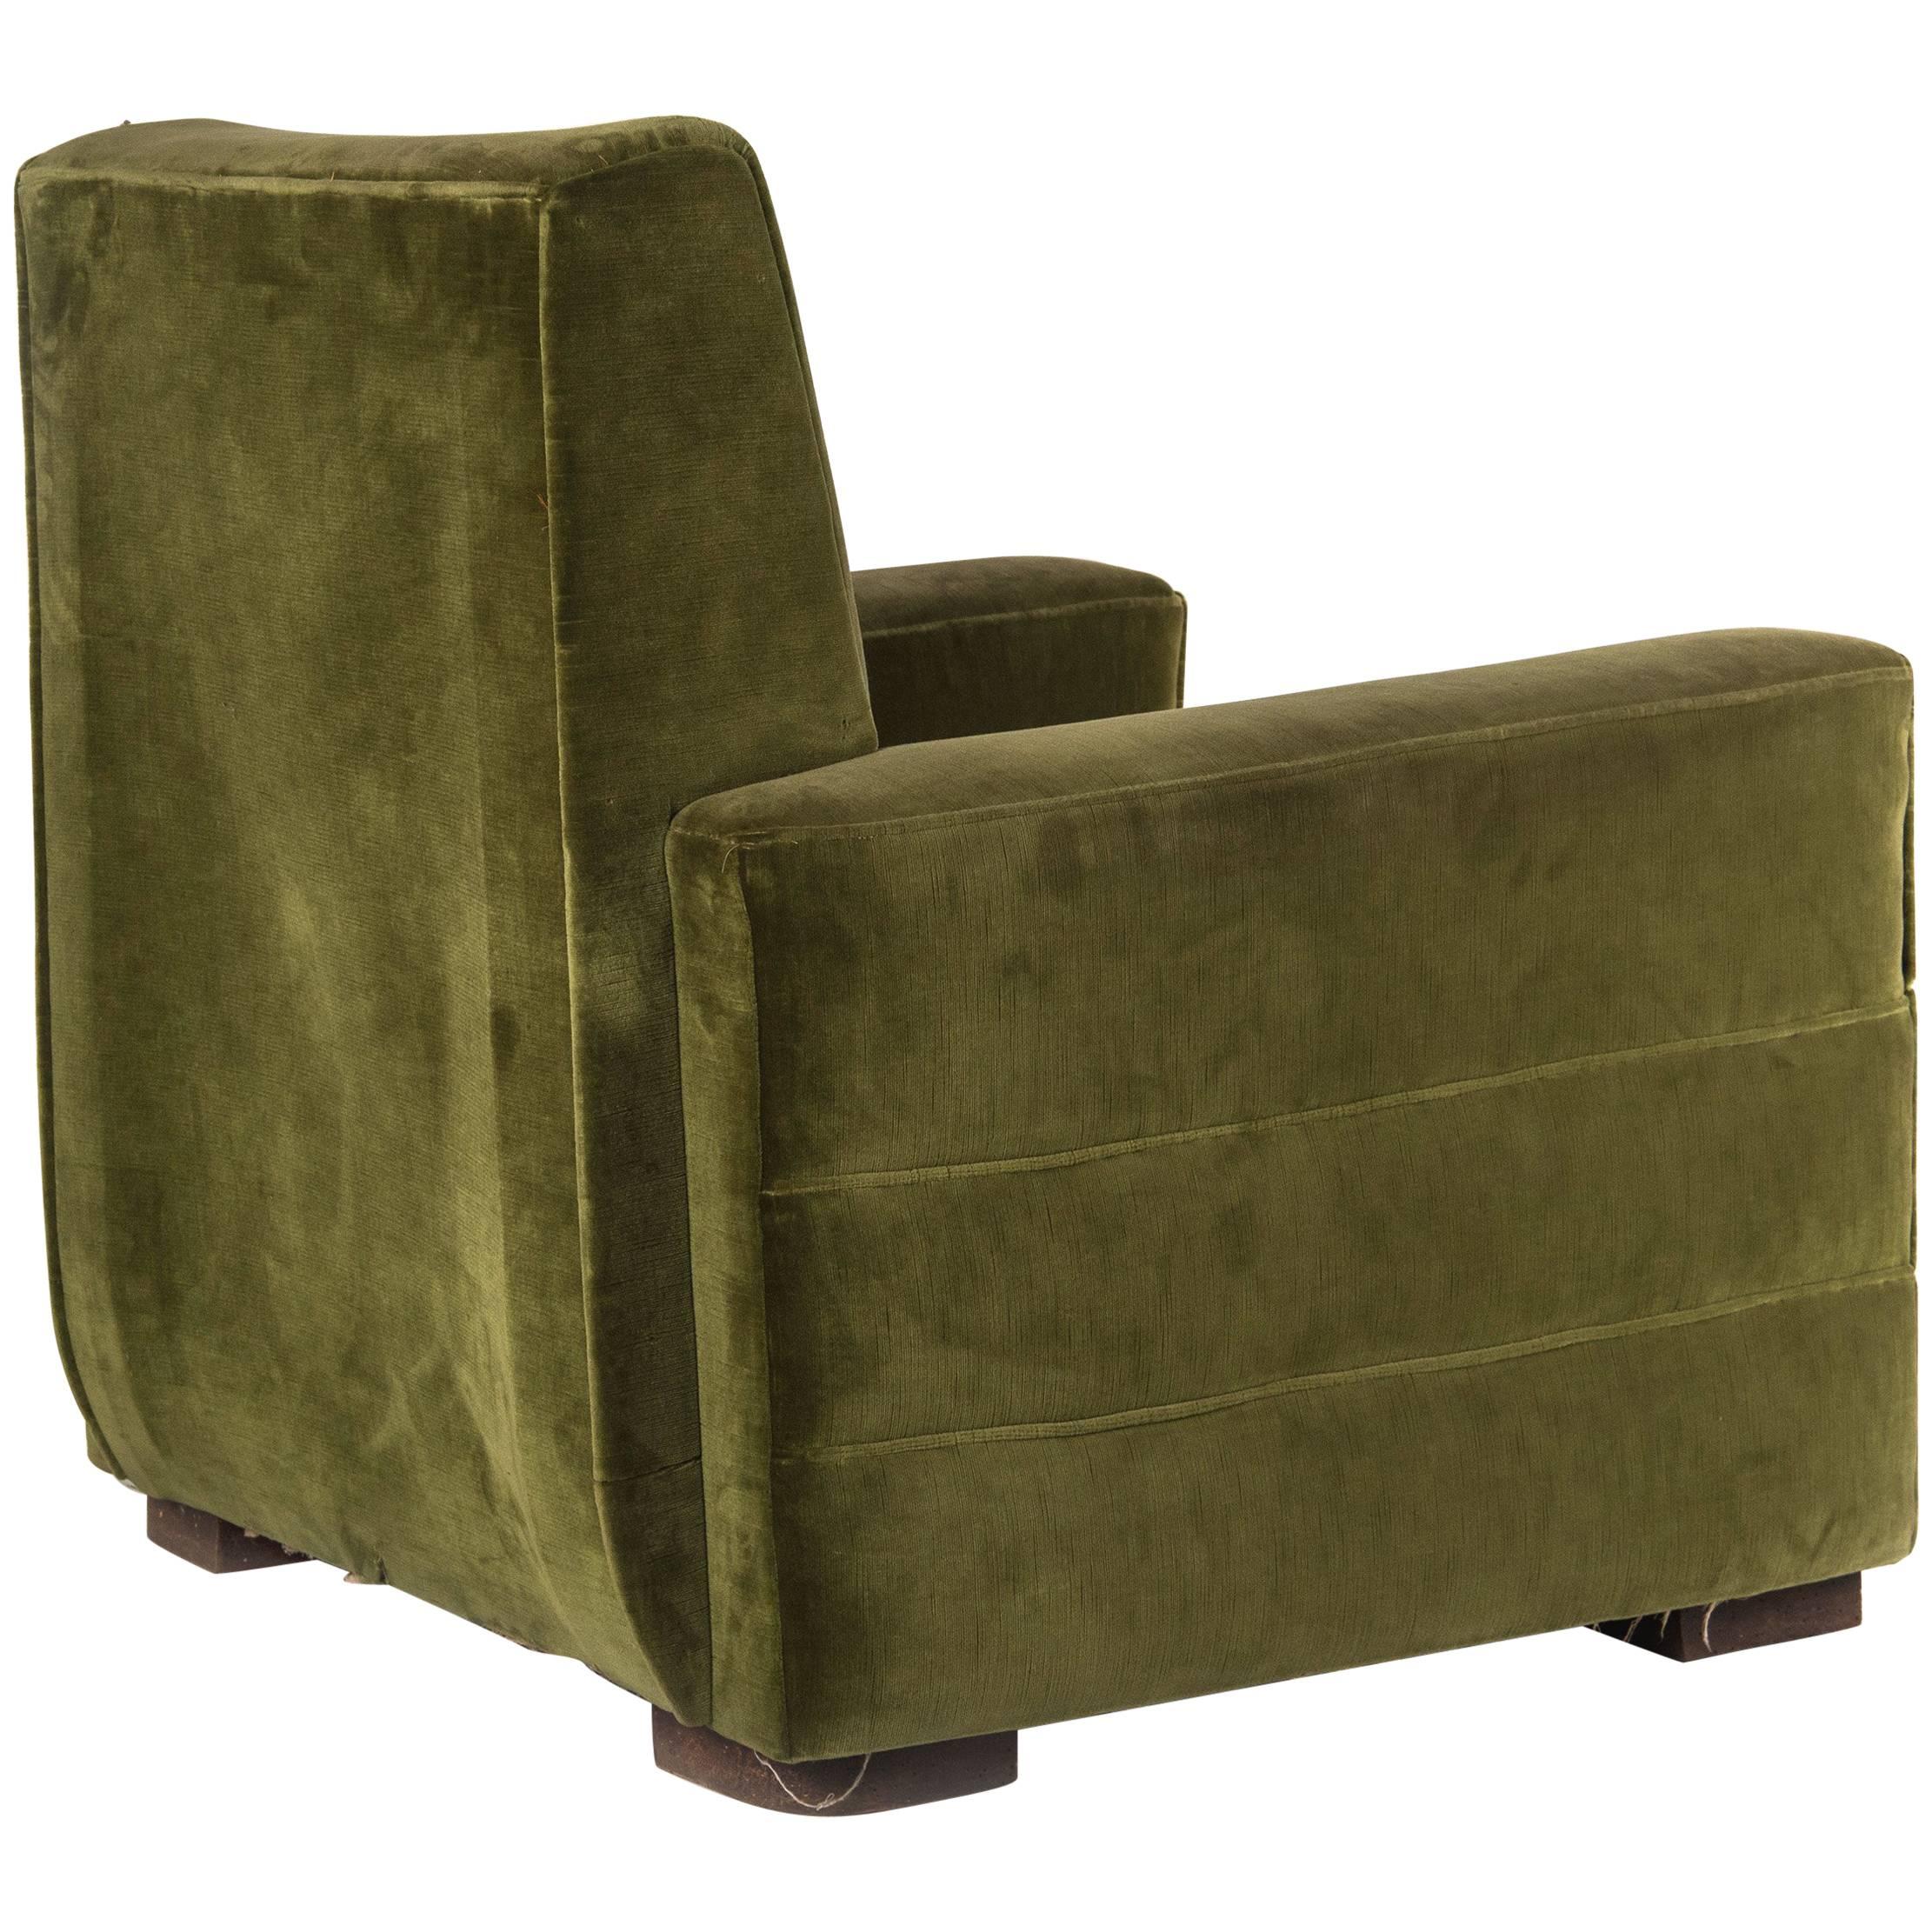 Velvet Armchair by Guglielmo Ulrich, Italy, 1942 For Sale